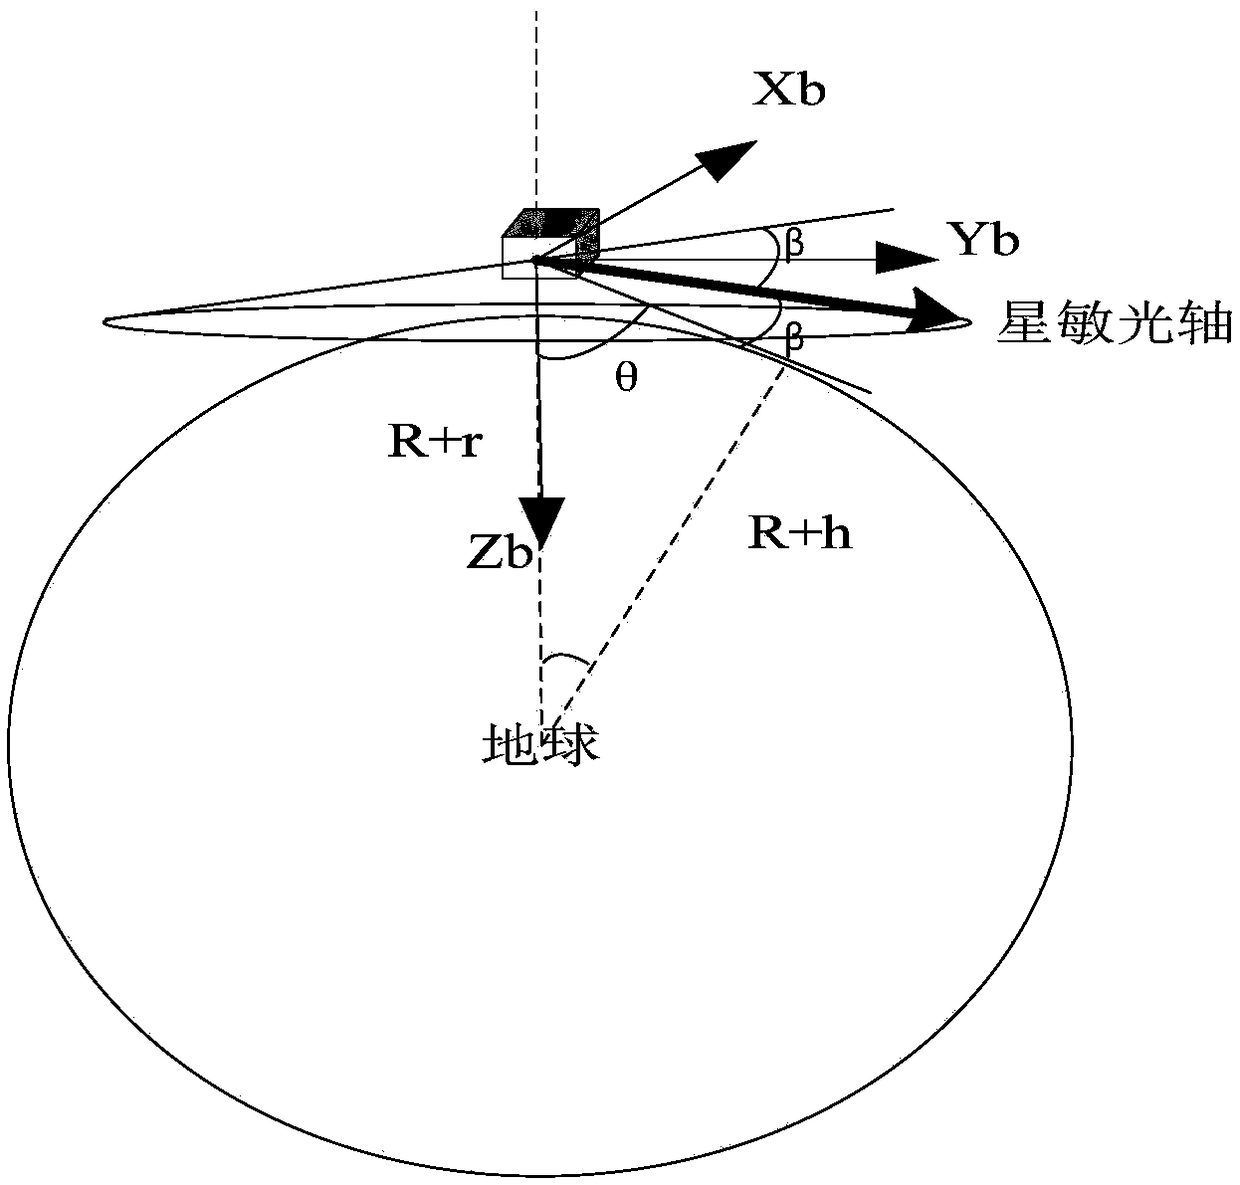 A method for use a low-inclination satellite star sensor